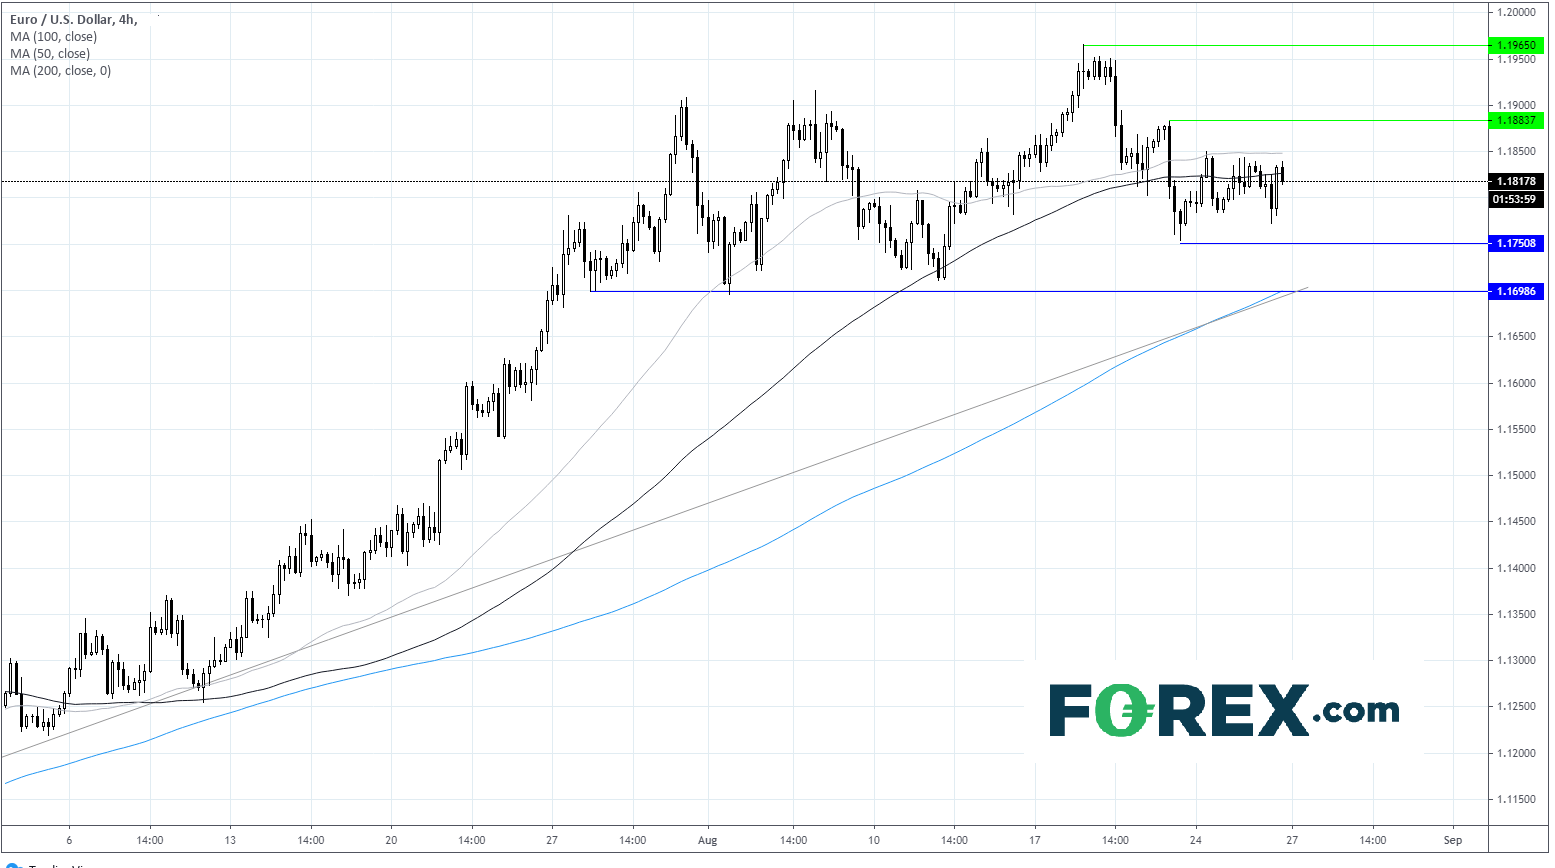 Market chart of the EURO(EUR)o to US Dollar(USD). Published in August 2020 by FOREX.com